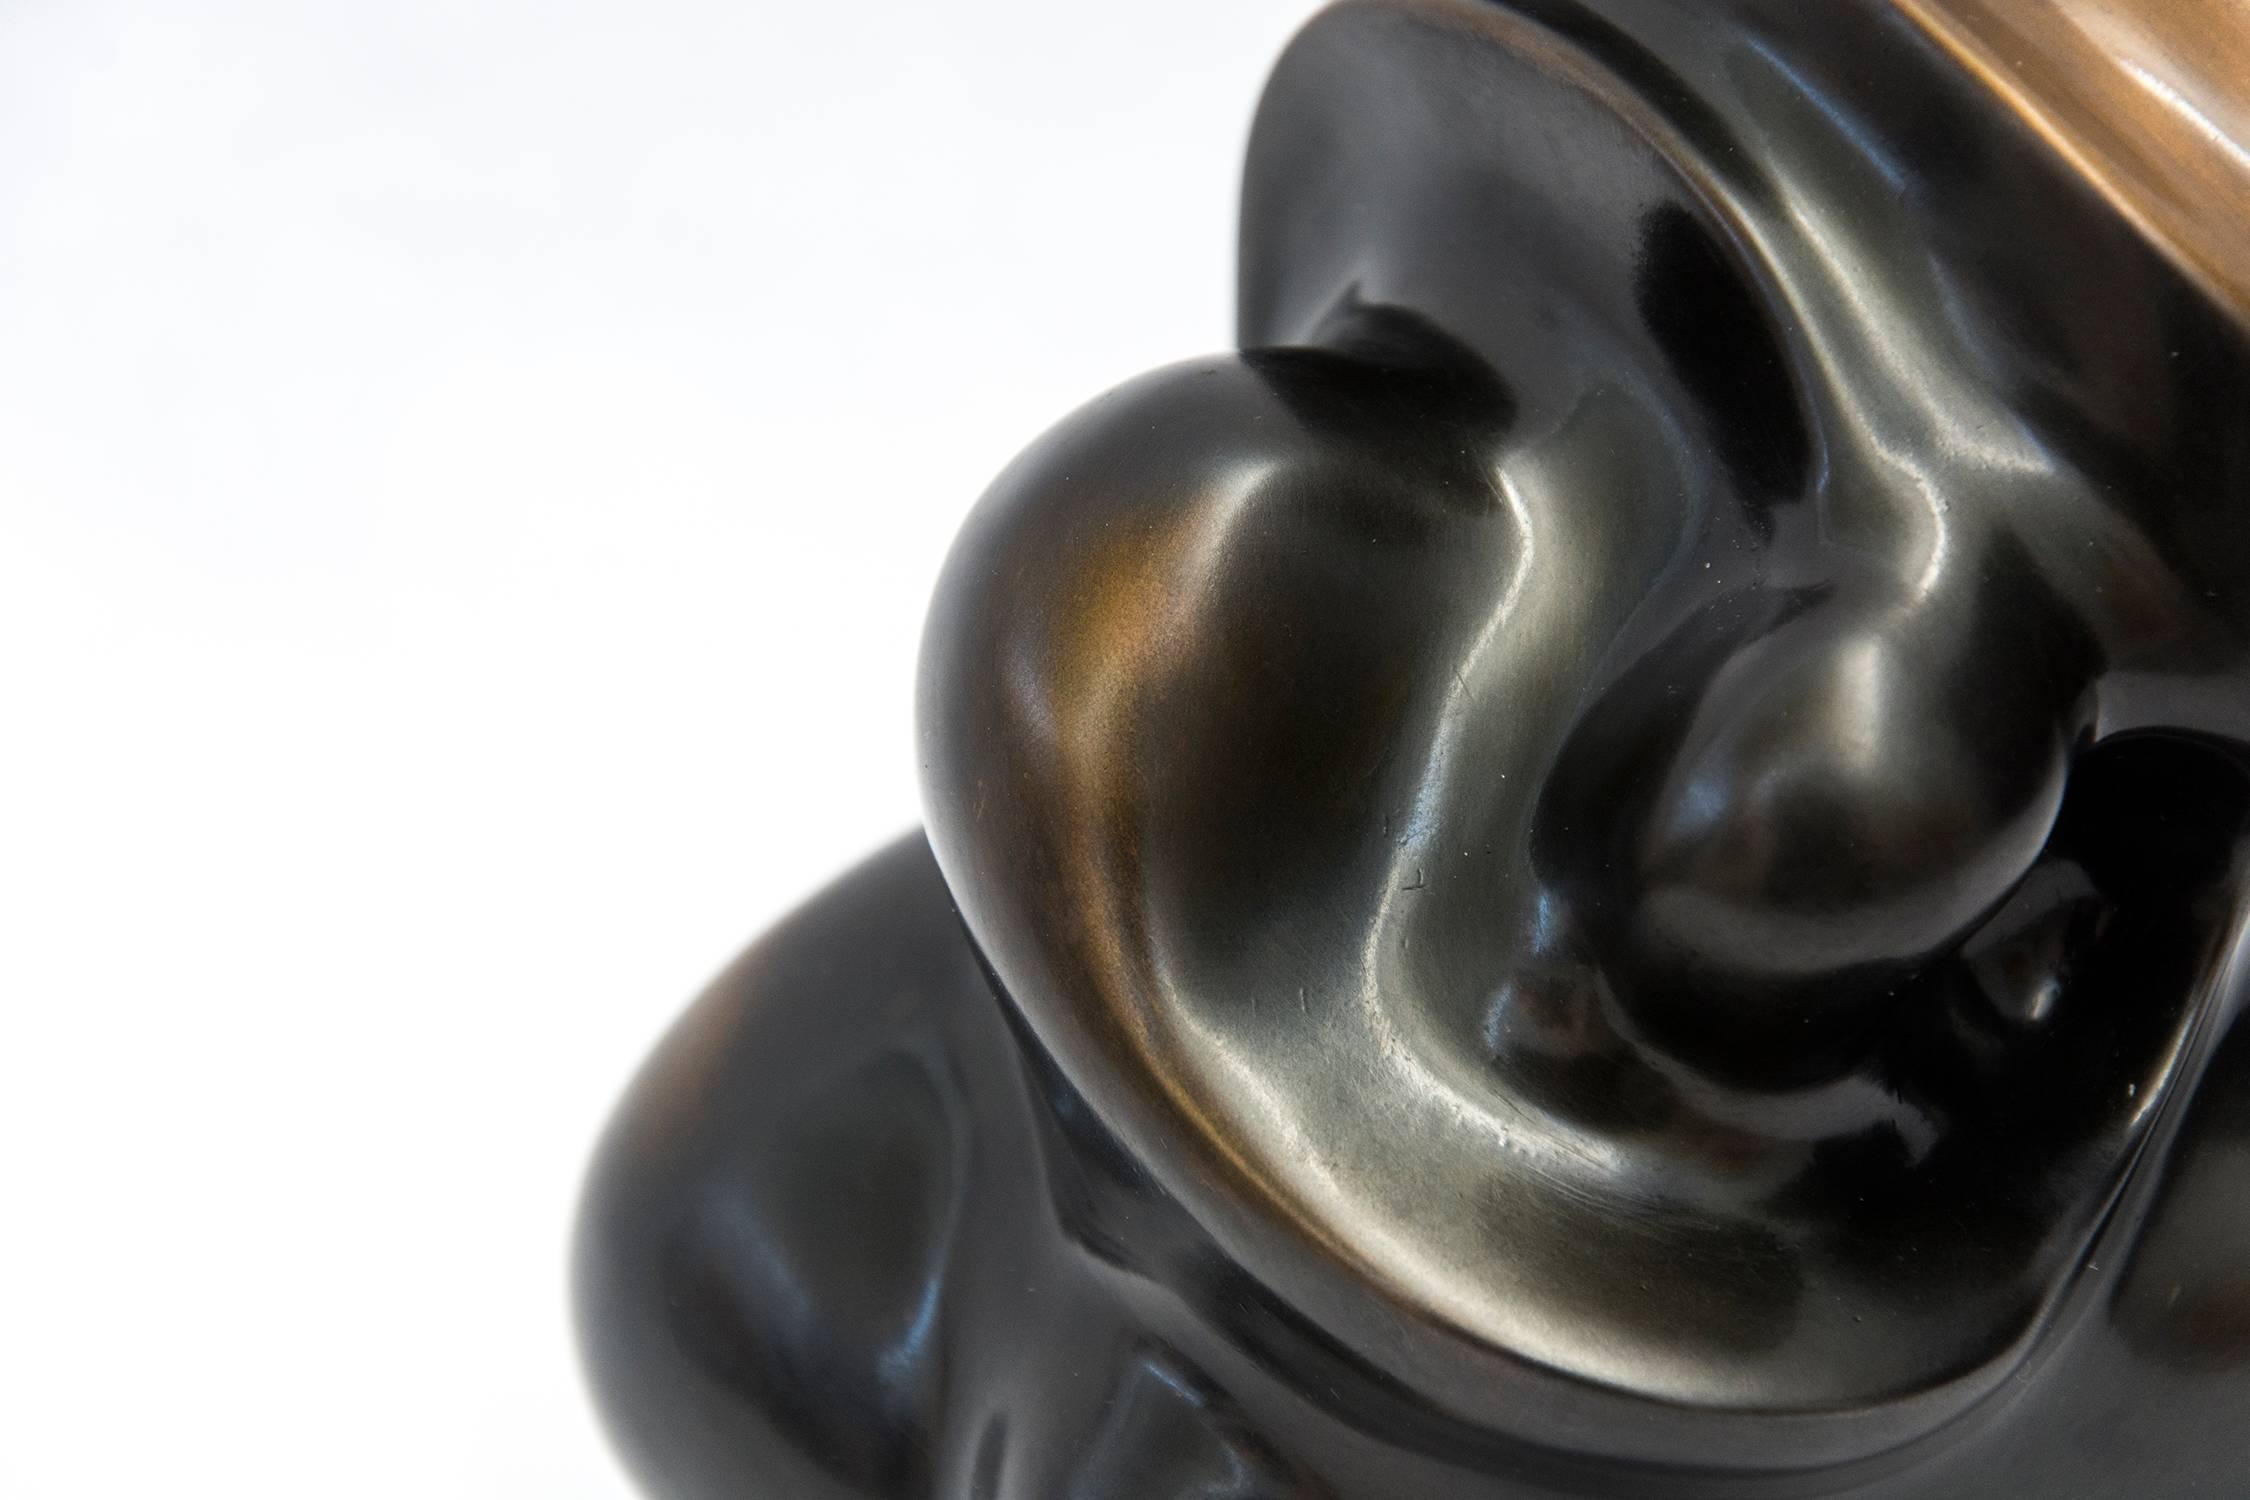 Grace AP - small, smooth, swirling, abstract bronze sculpture - Abstract Sculpture by Tim Forbes